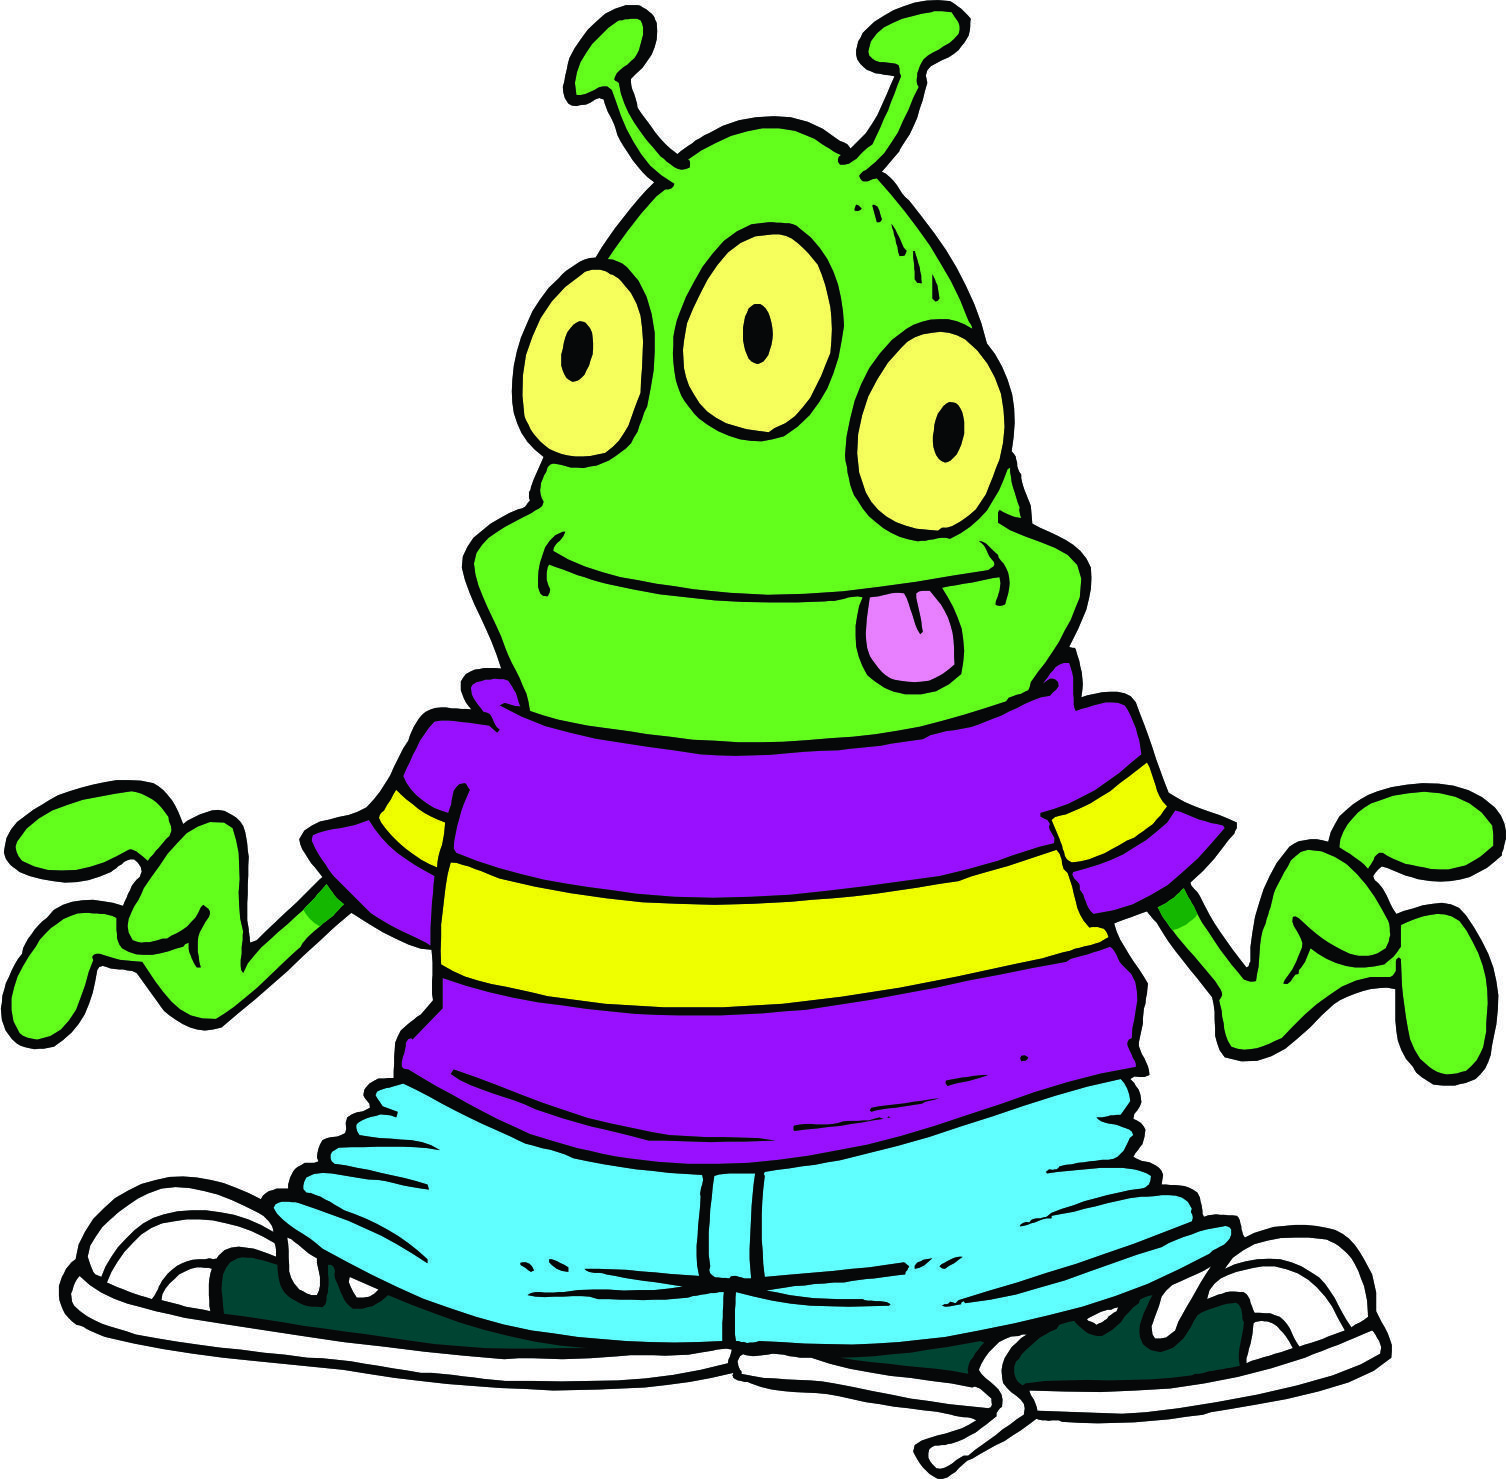 Free Cartoon Alien Image, Download .clipart Library.com